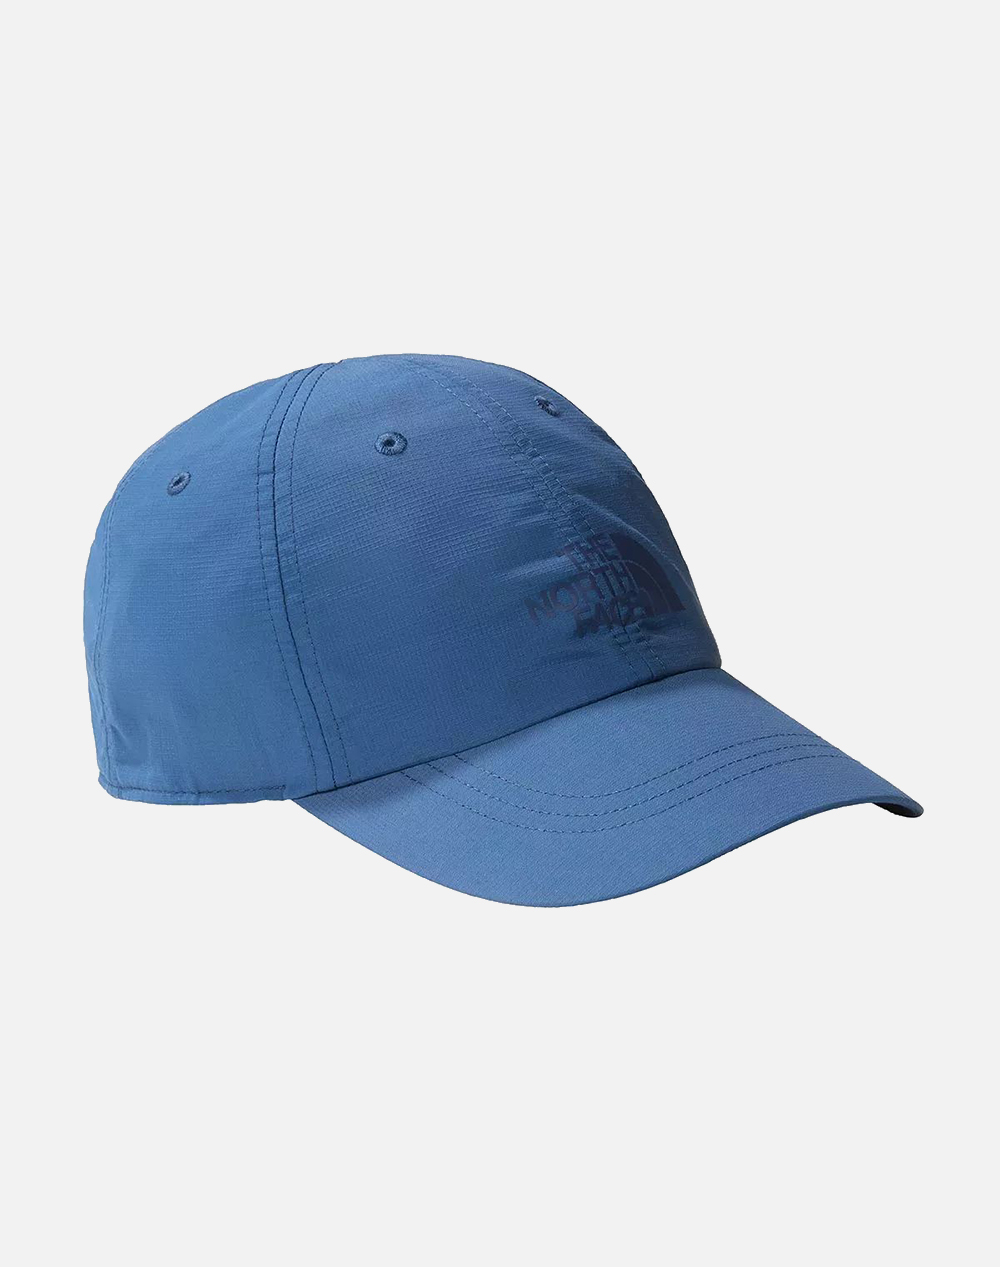 THE NORTH FACE HORIZON HAT (Διαστάσεις: 22 x 21 εκ) NF0A5FXL-NFHDC Blue 3800ATNFA5700001_XR28863